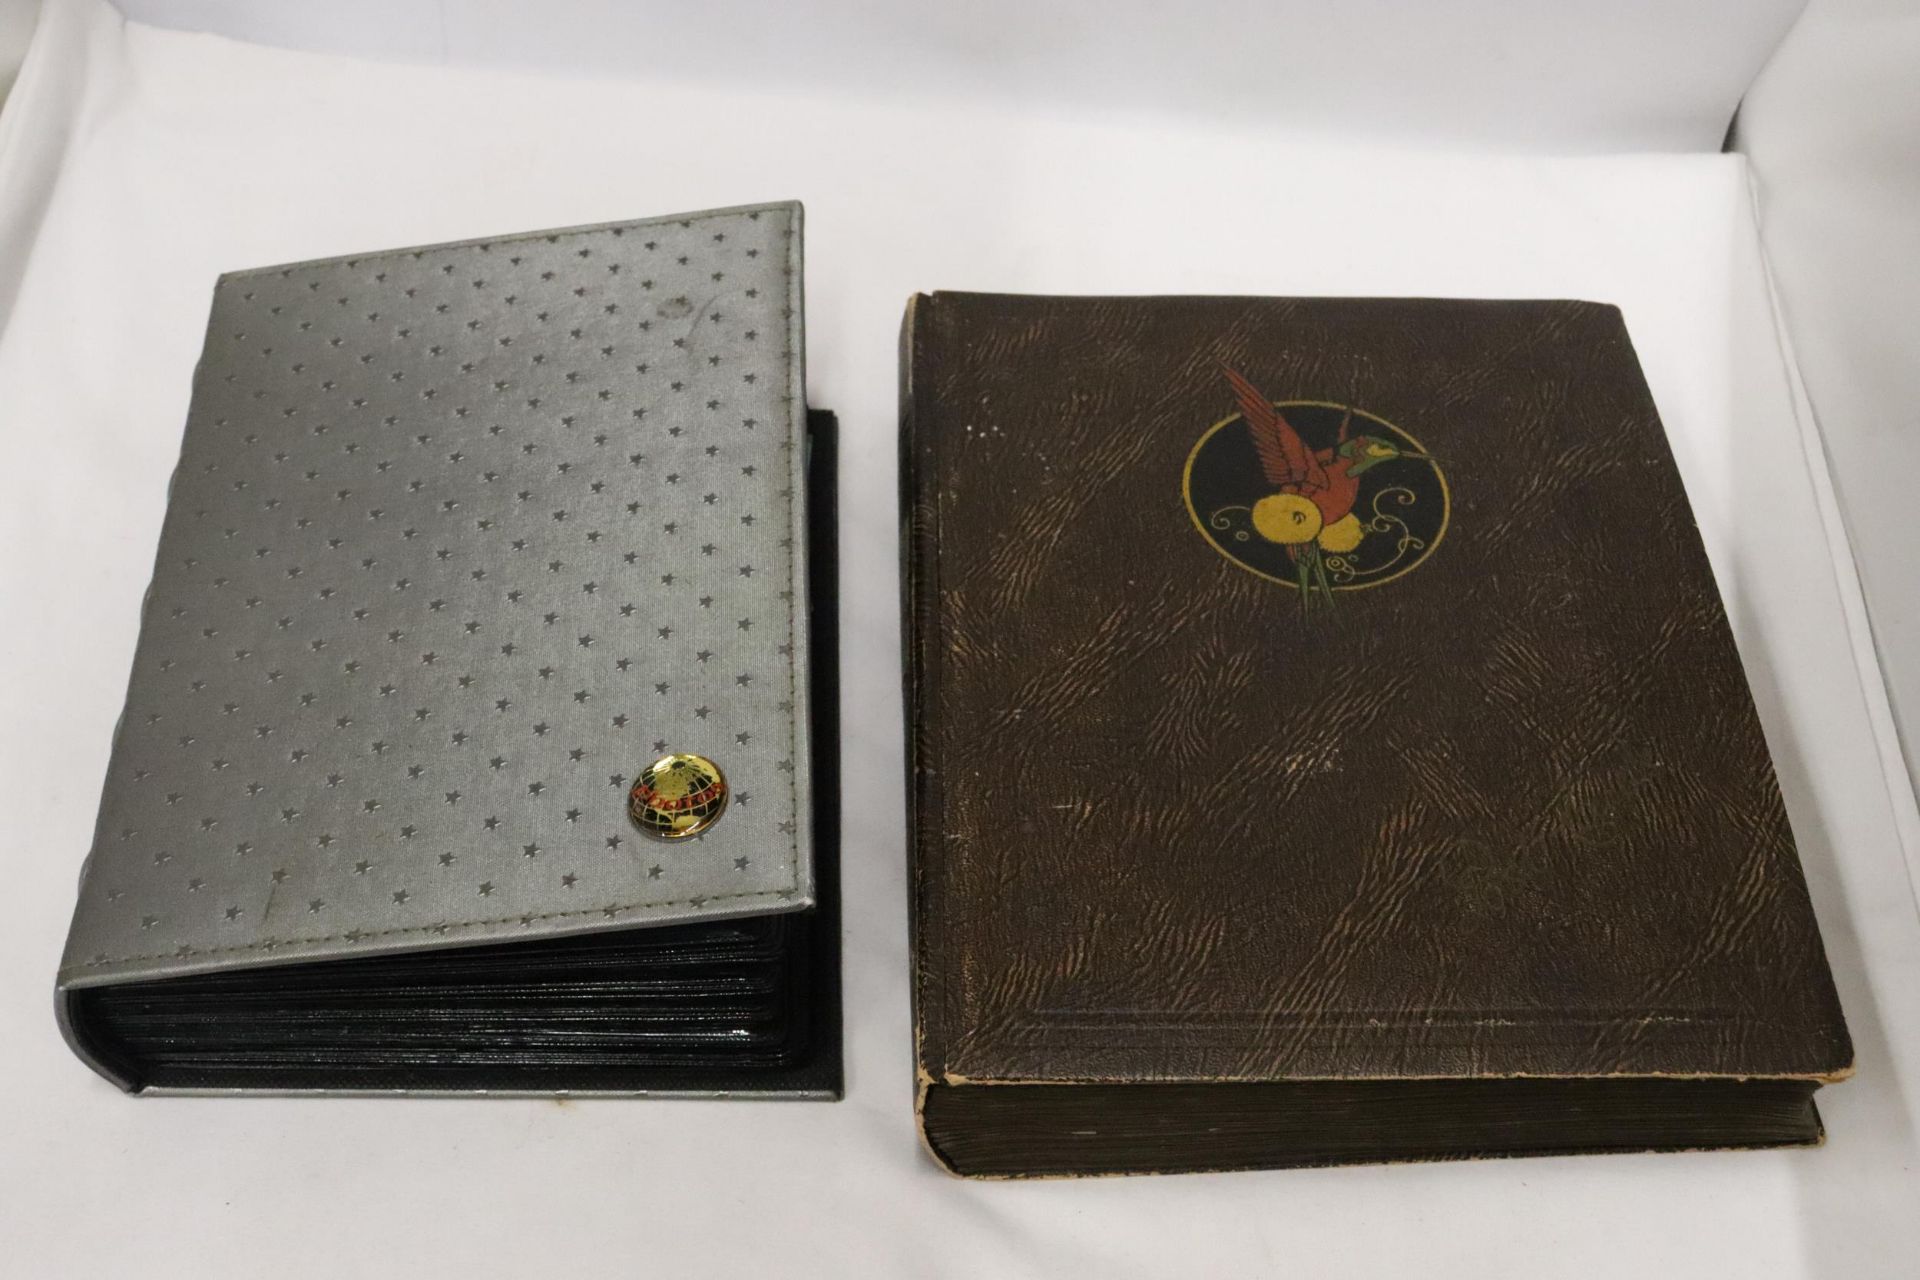 TWO POSTCARD ALBUMS WITH SHIPPING INTERST POSTCARDS